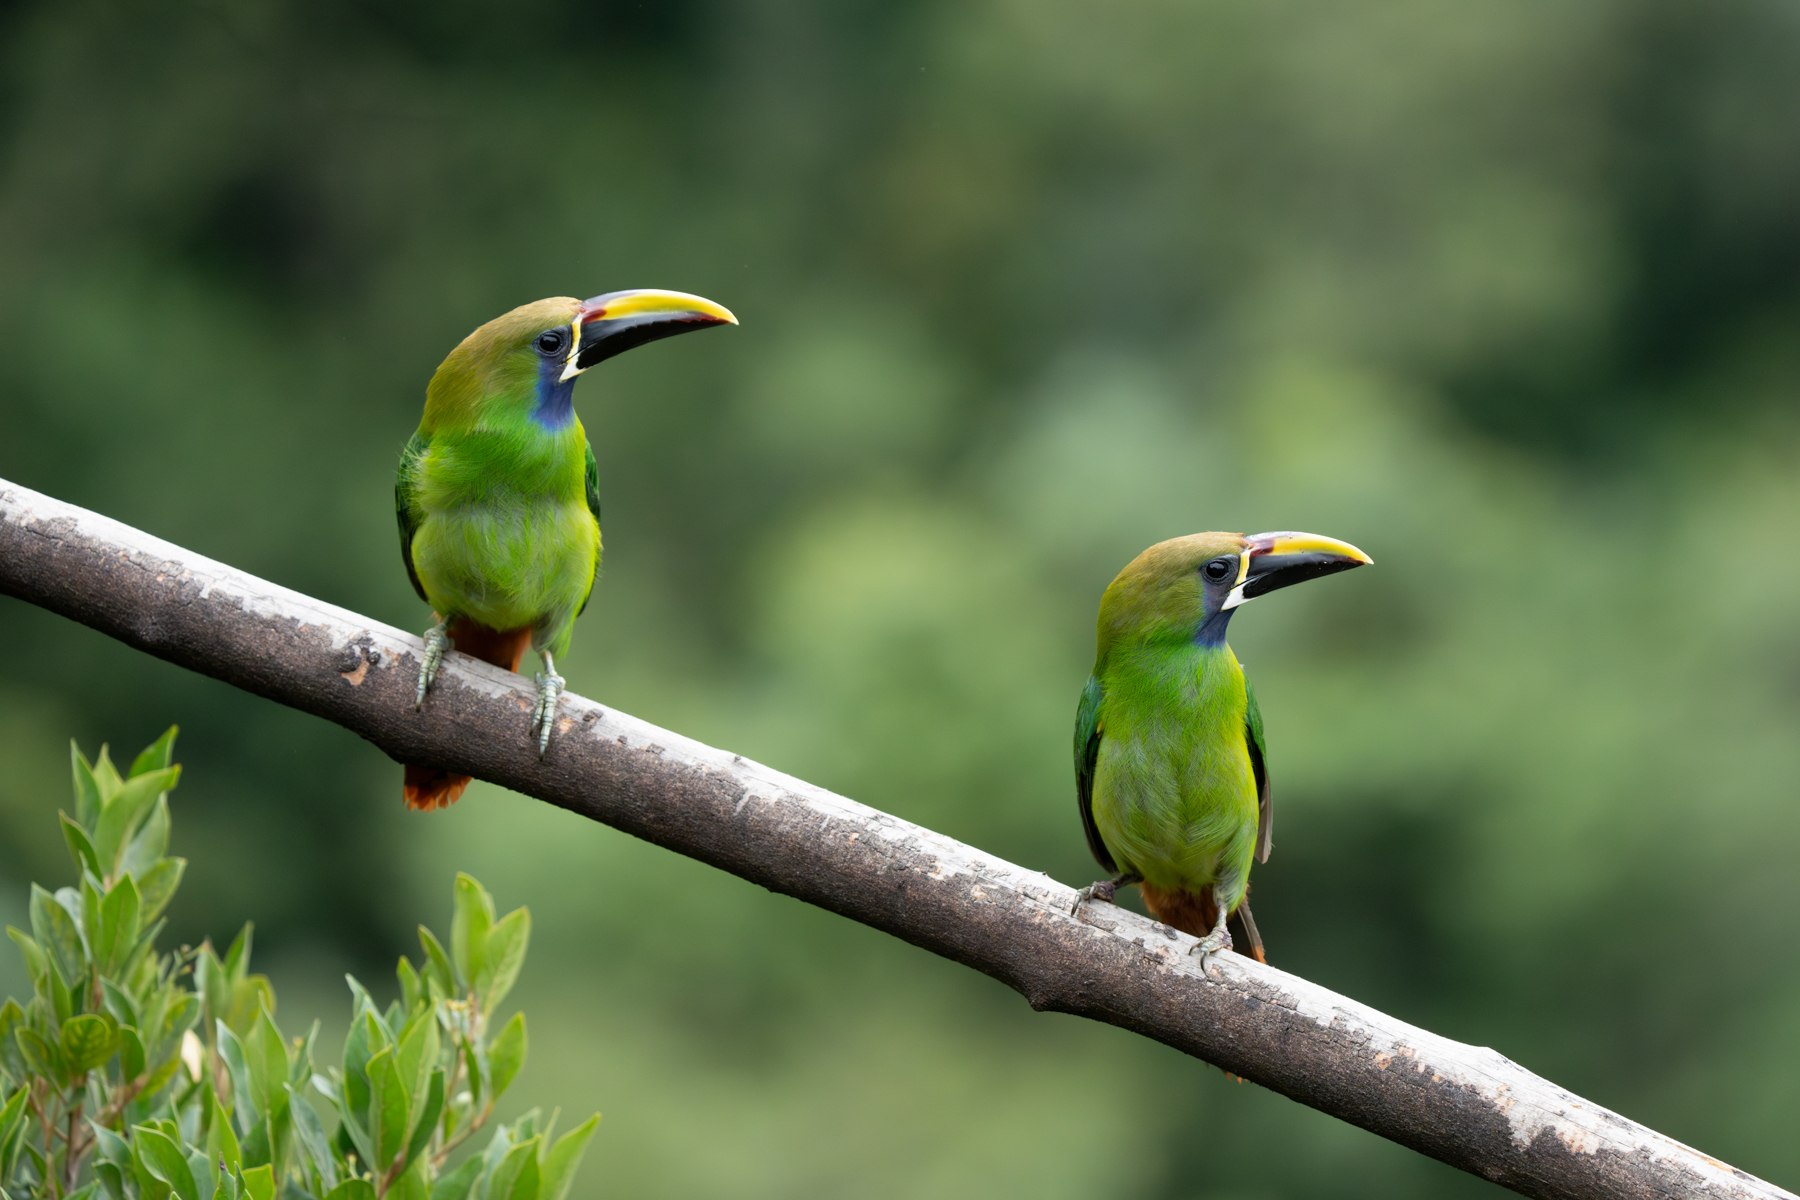 A pair of Emerald Toucanets (image by Inger Vandyke)